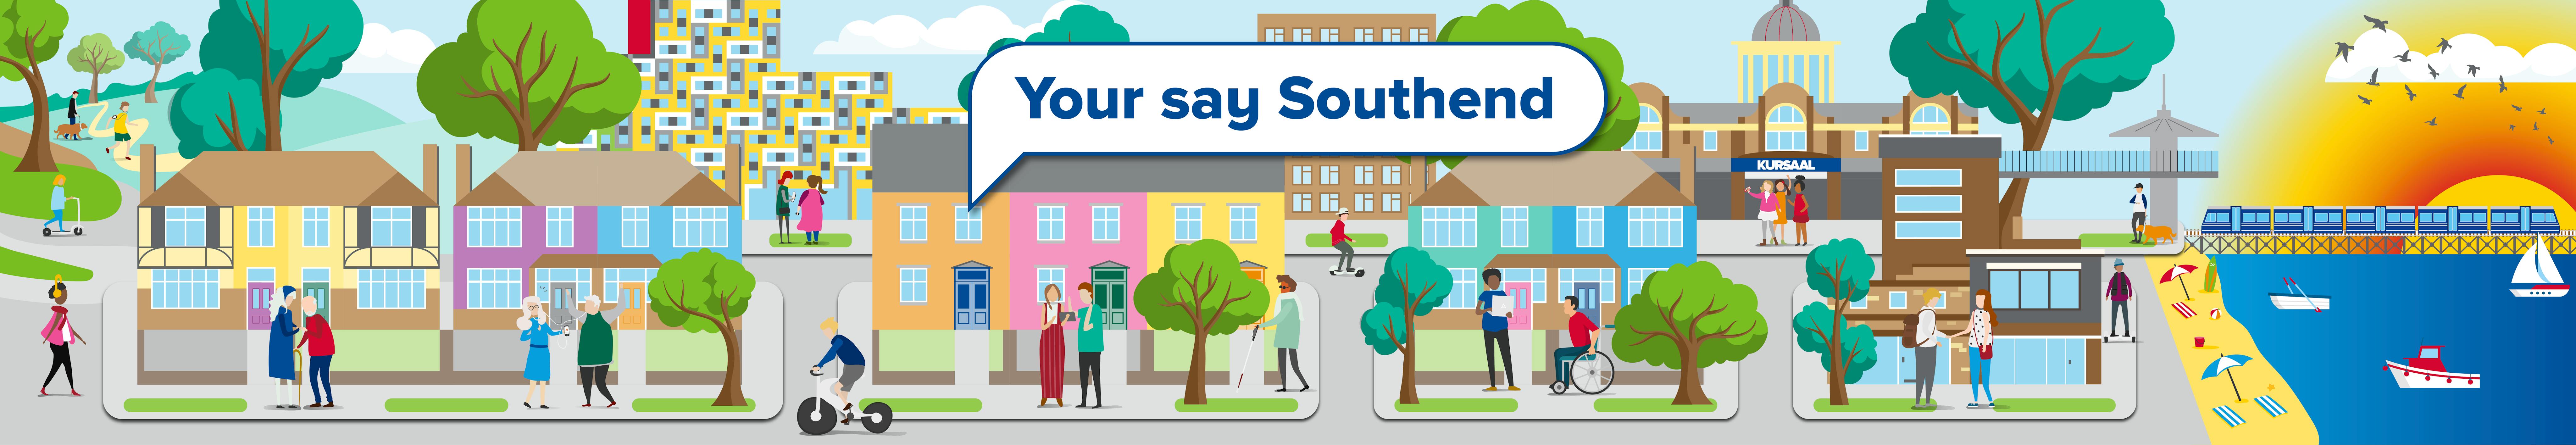 Your say Southend banner